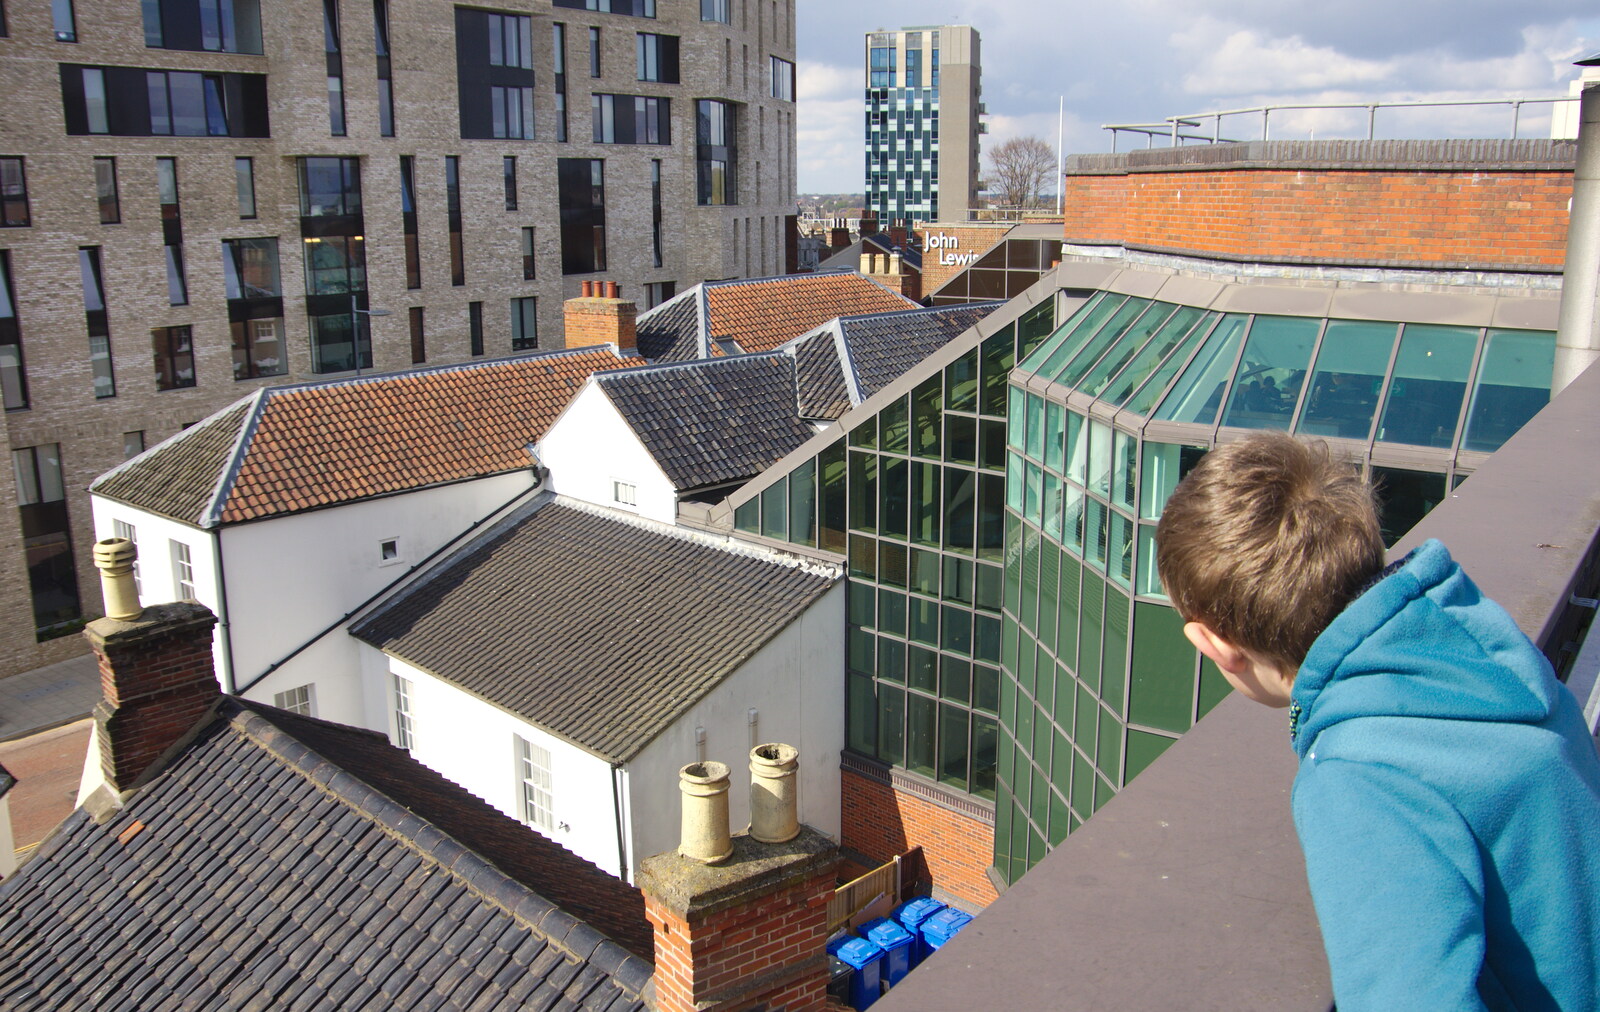 Fred looks out over the rooftops from Singing in John Lewis, Norwich, Norfolk - 13th April 2019